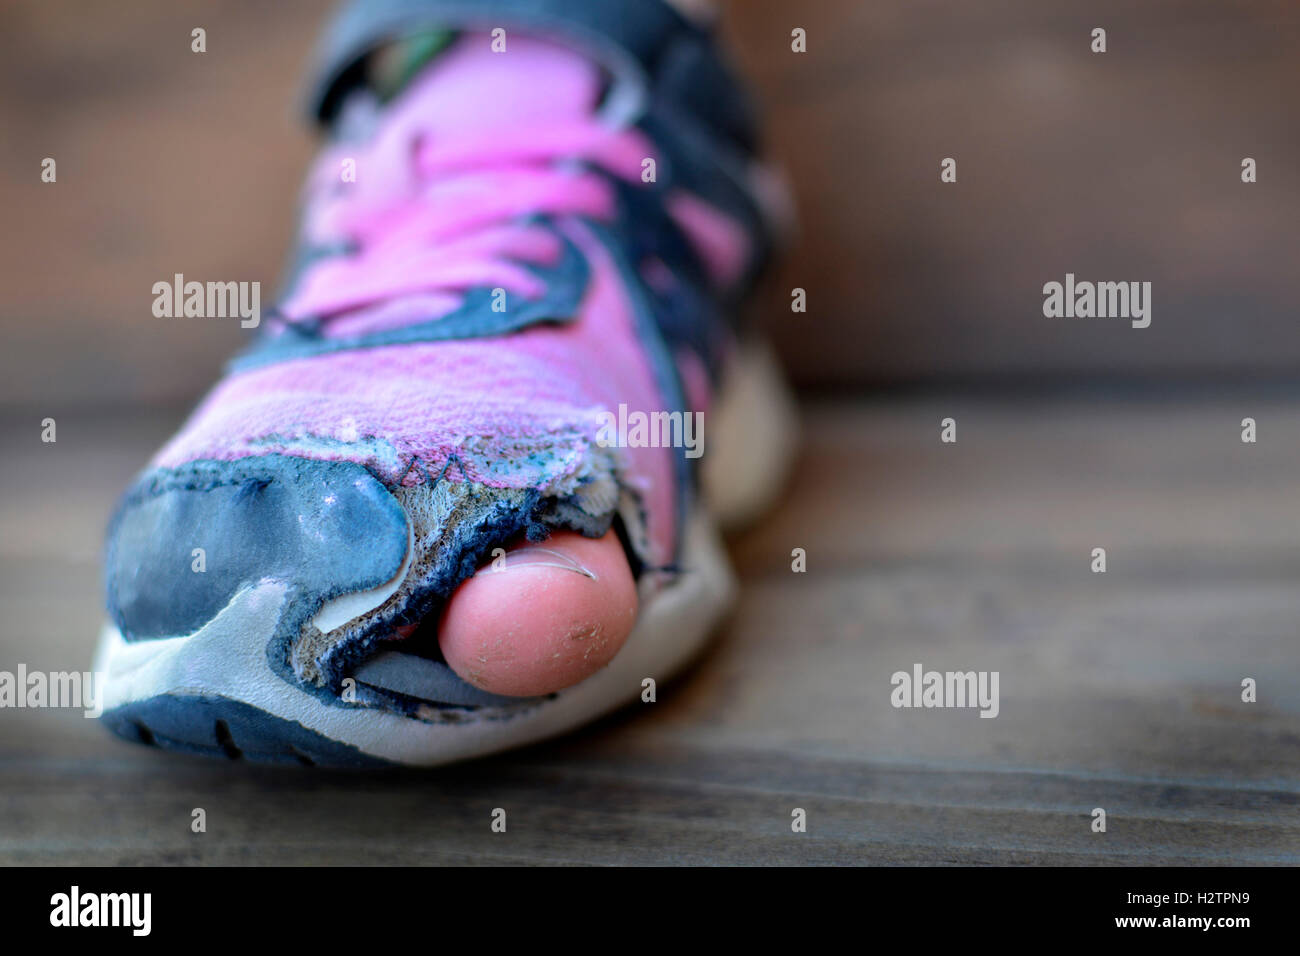 Old shoes with holes worn down shabby for homeless clothing toes sticking out Stock Photo